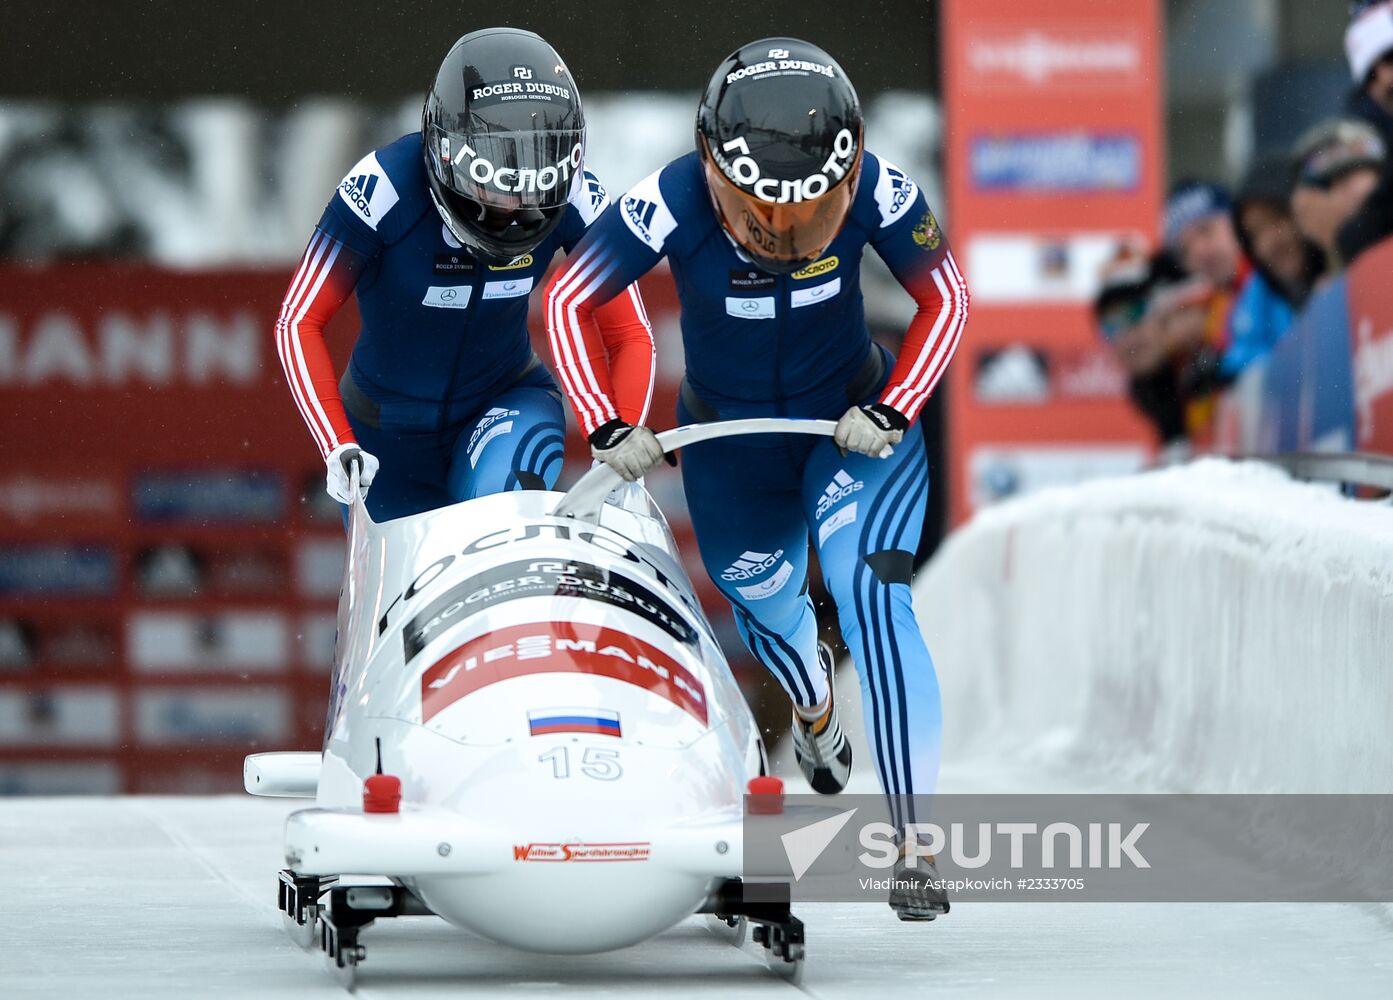 Bobsled. Second stage of World Cup. Women's double